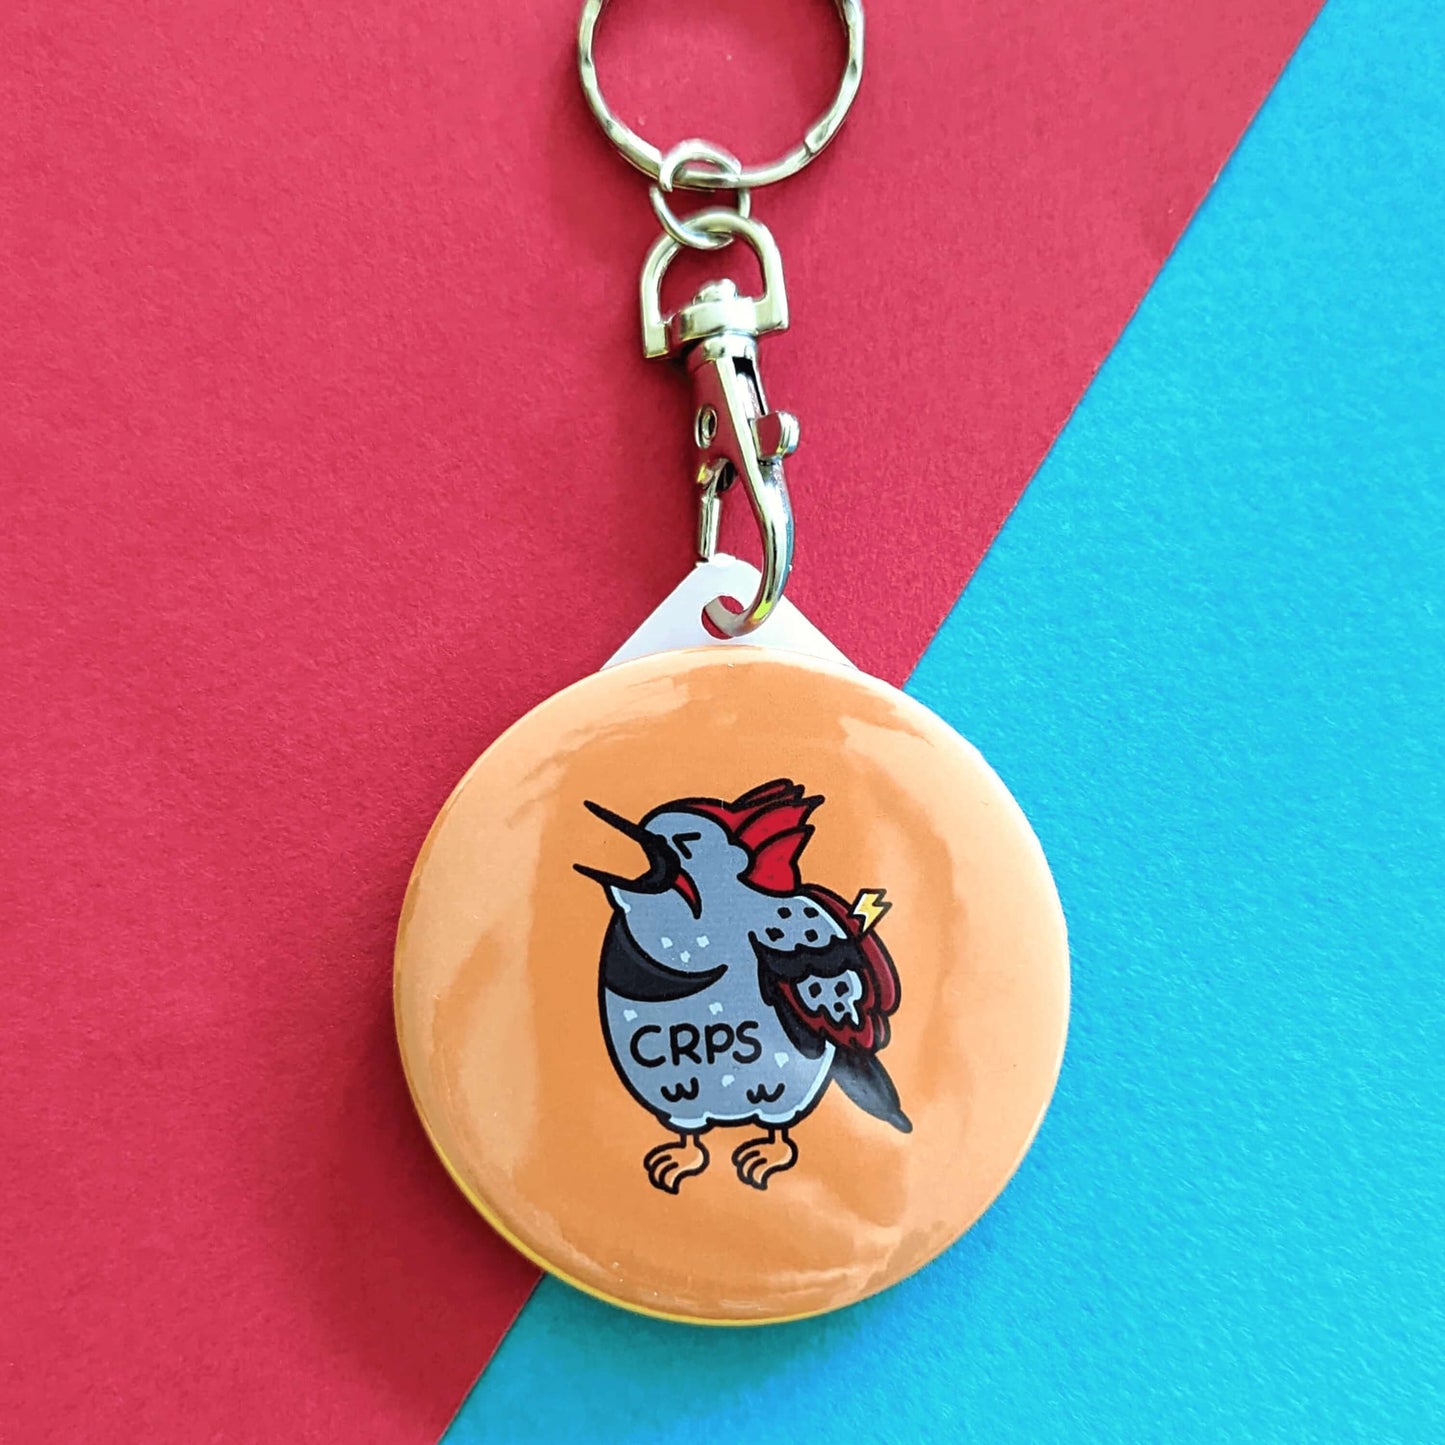 CRPS Keyring - Complex Regional Pain Syndrome on a red and blue background. The silver clip yellow plastic circular keychain features a screaming upset woodpecker bird with a lightning bolt on its wing and 'CRPS' written across its belly in black. The design is raising awareness for complex regional pain syndrome.